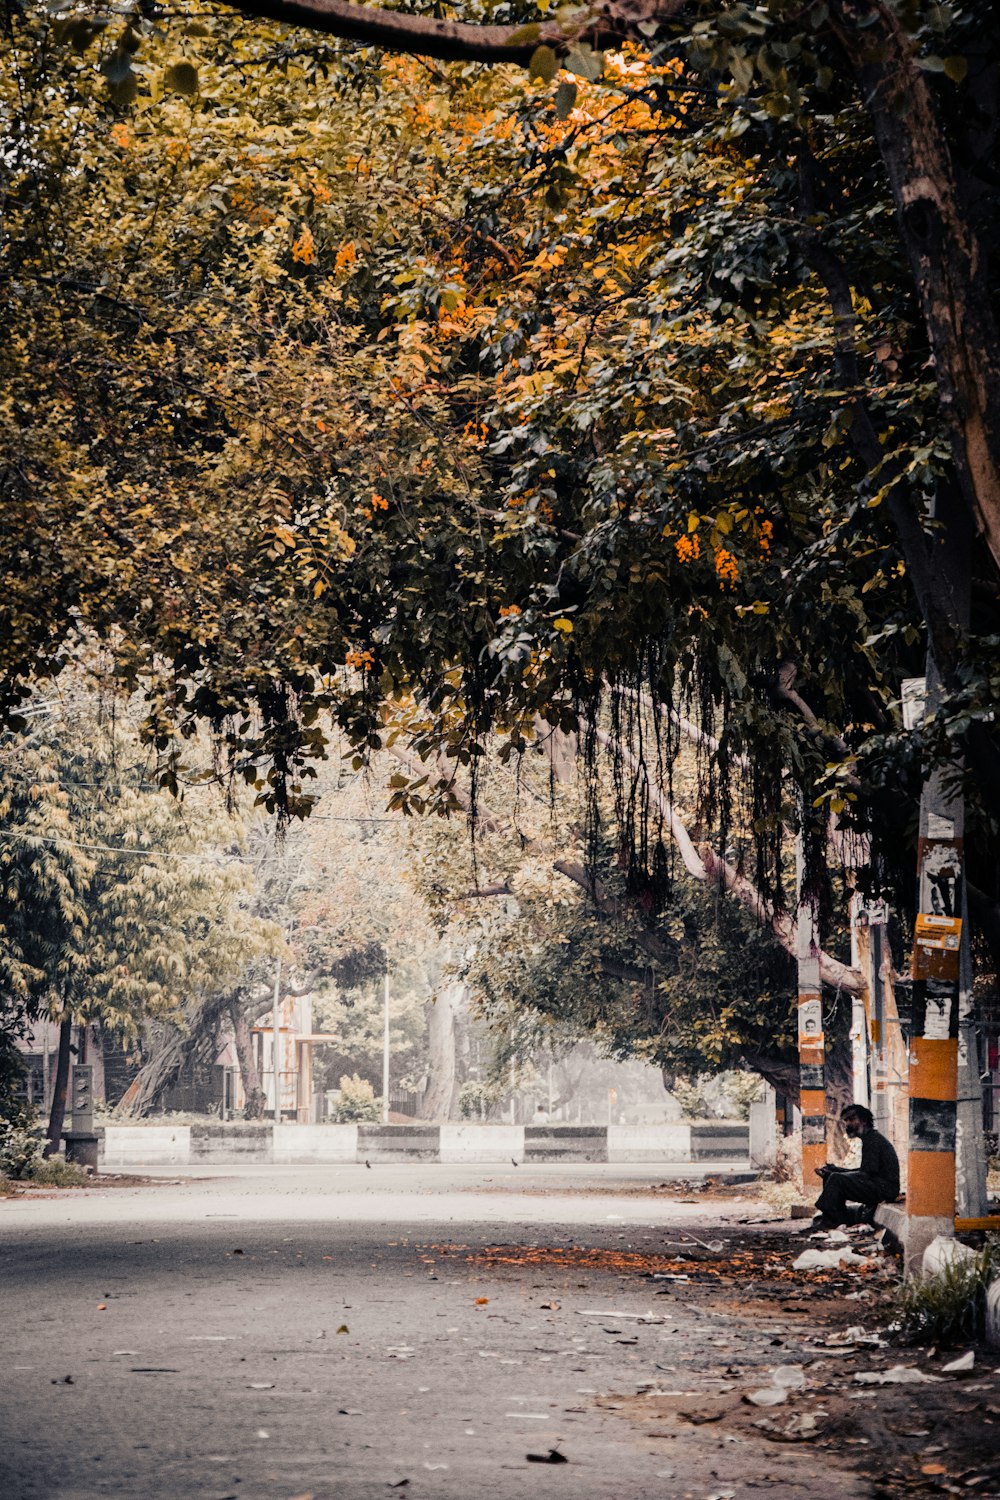 a person sitting on a bench under a tree with yellow leaves